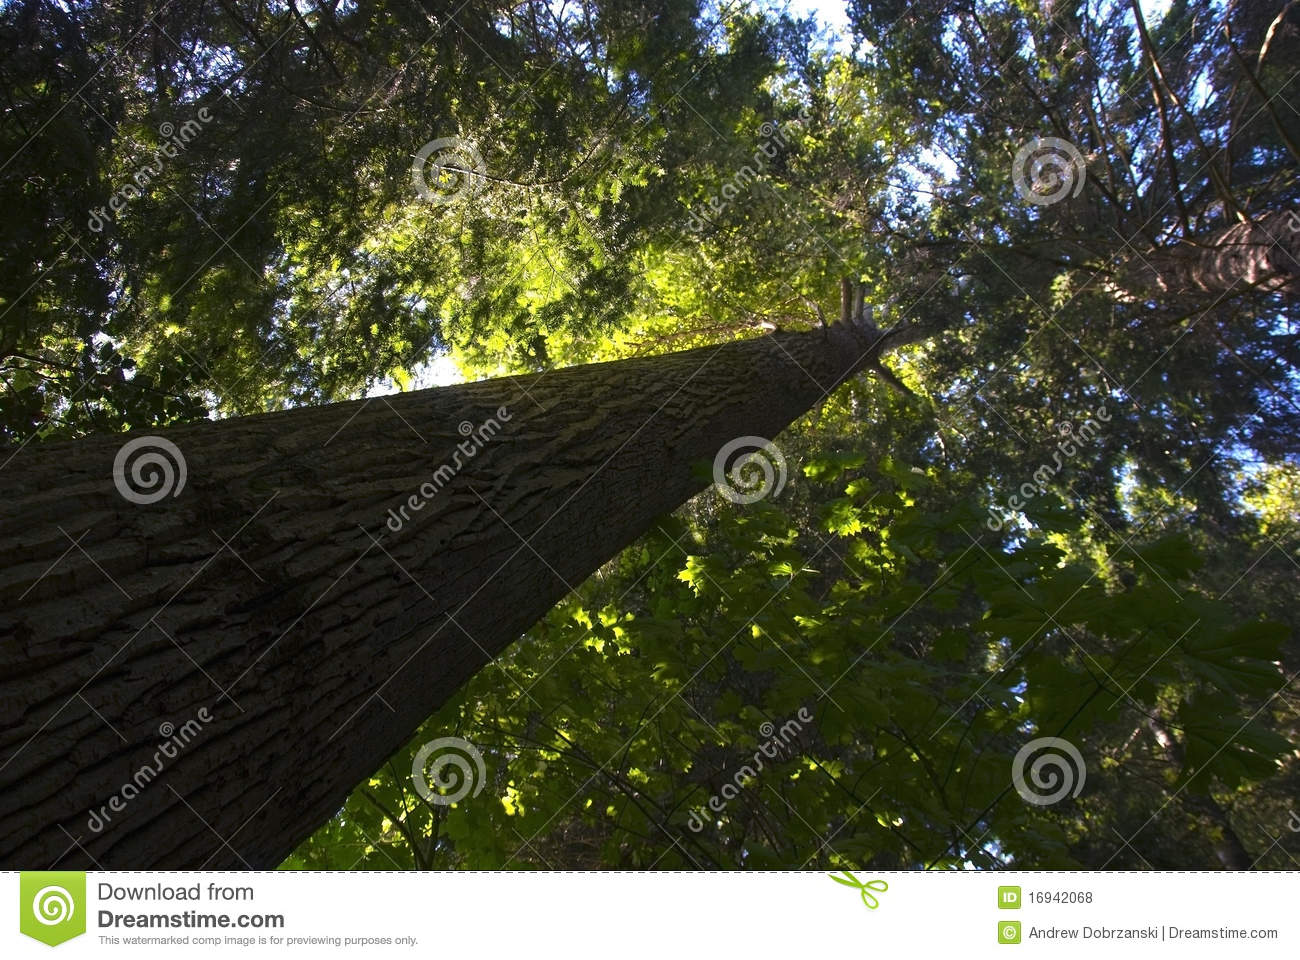 Old Growth Tree